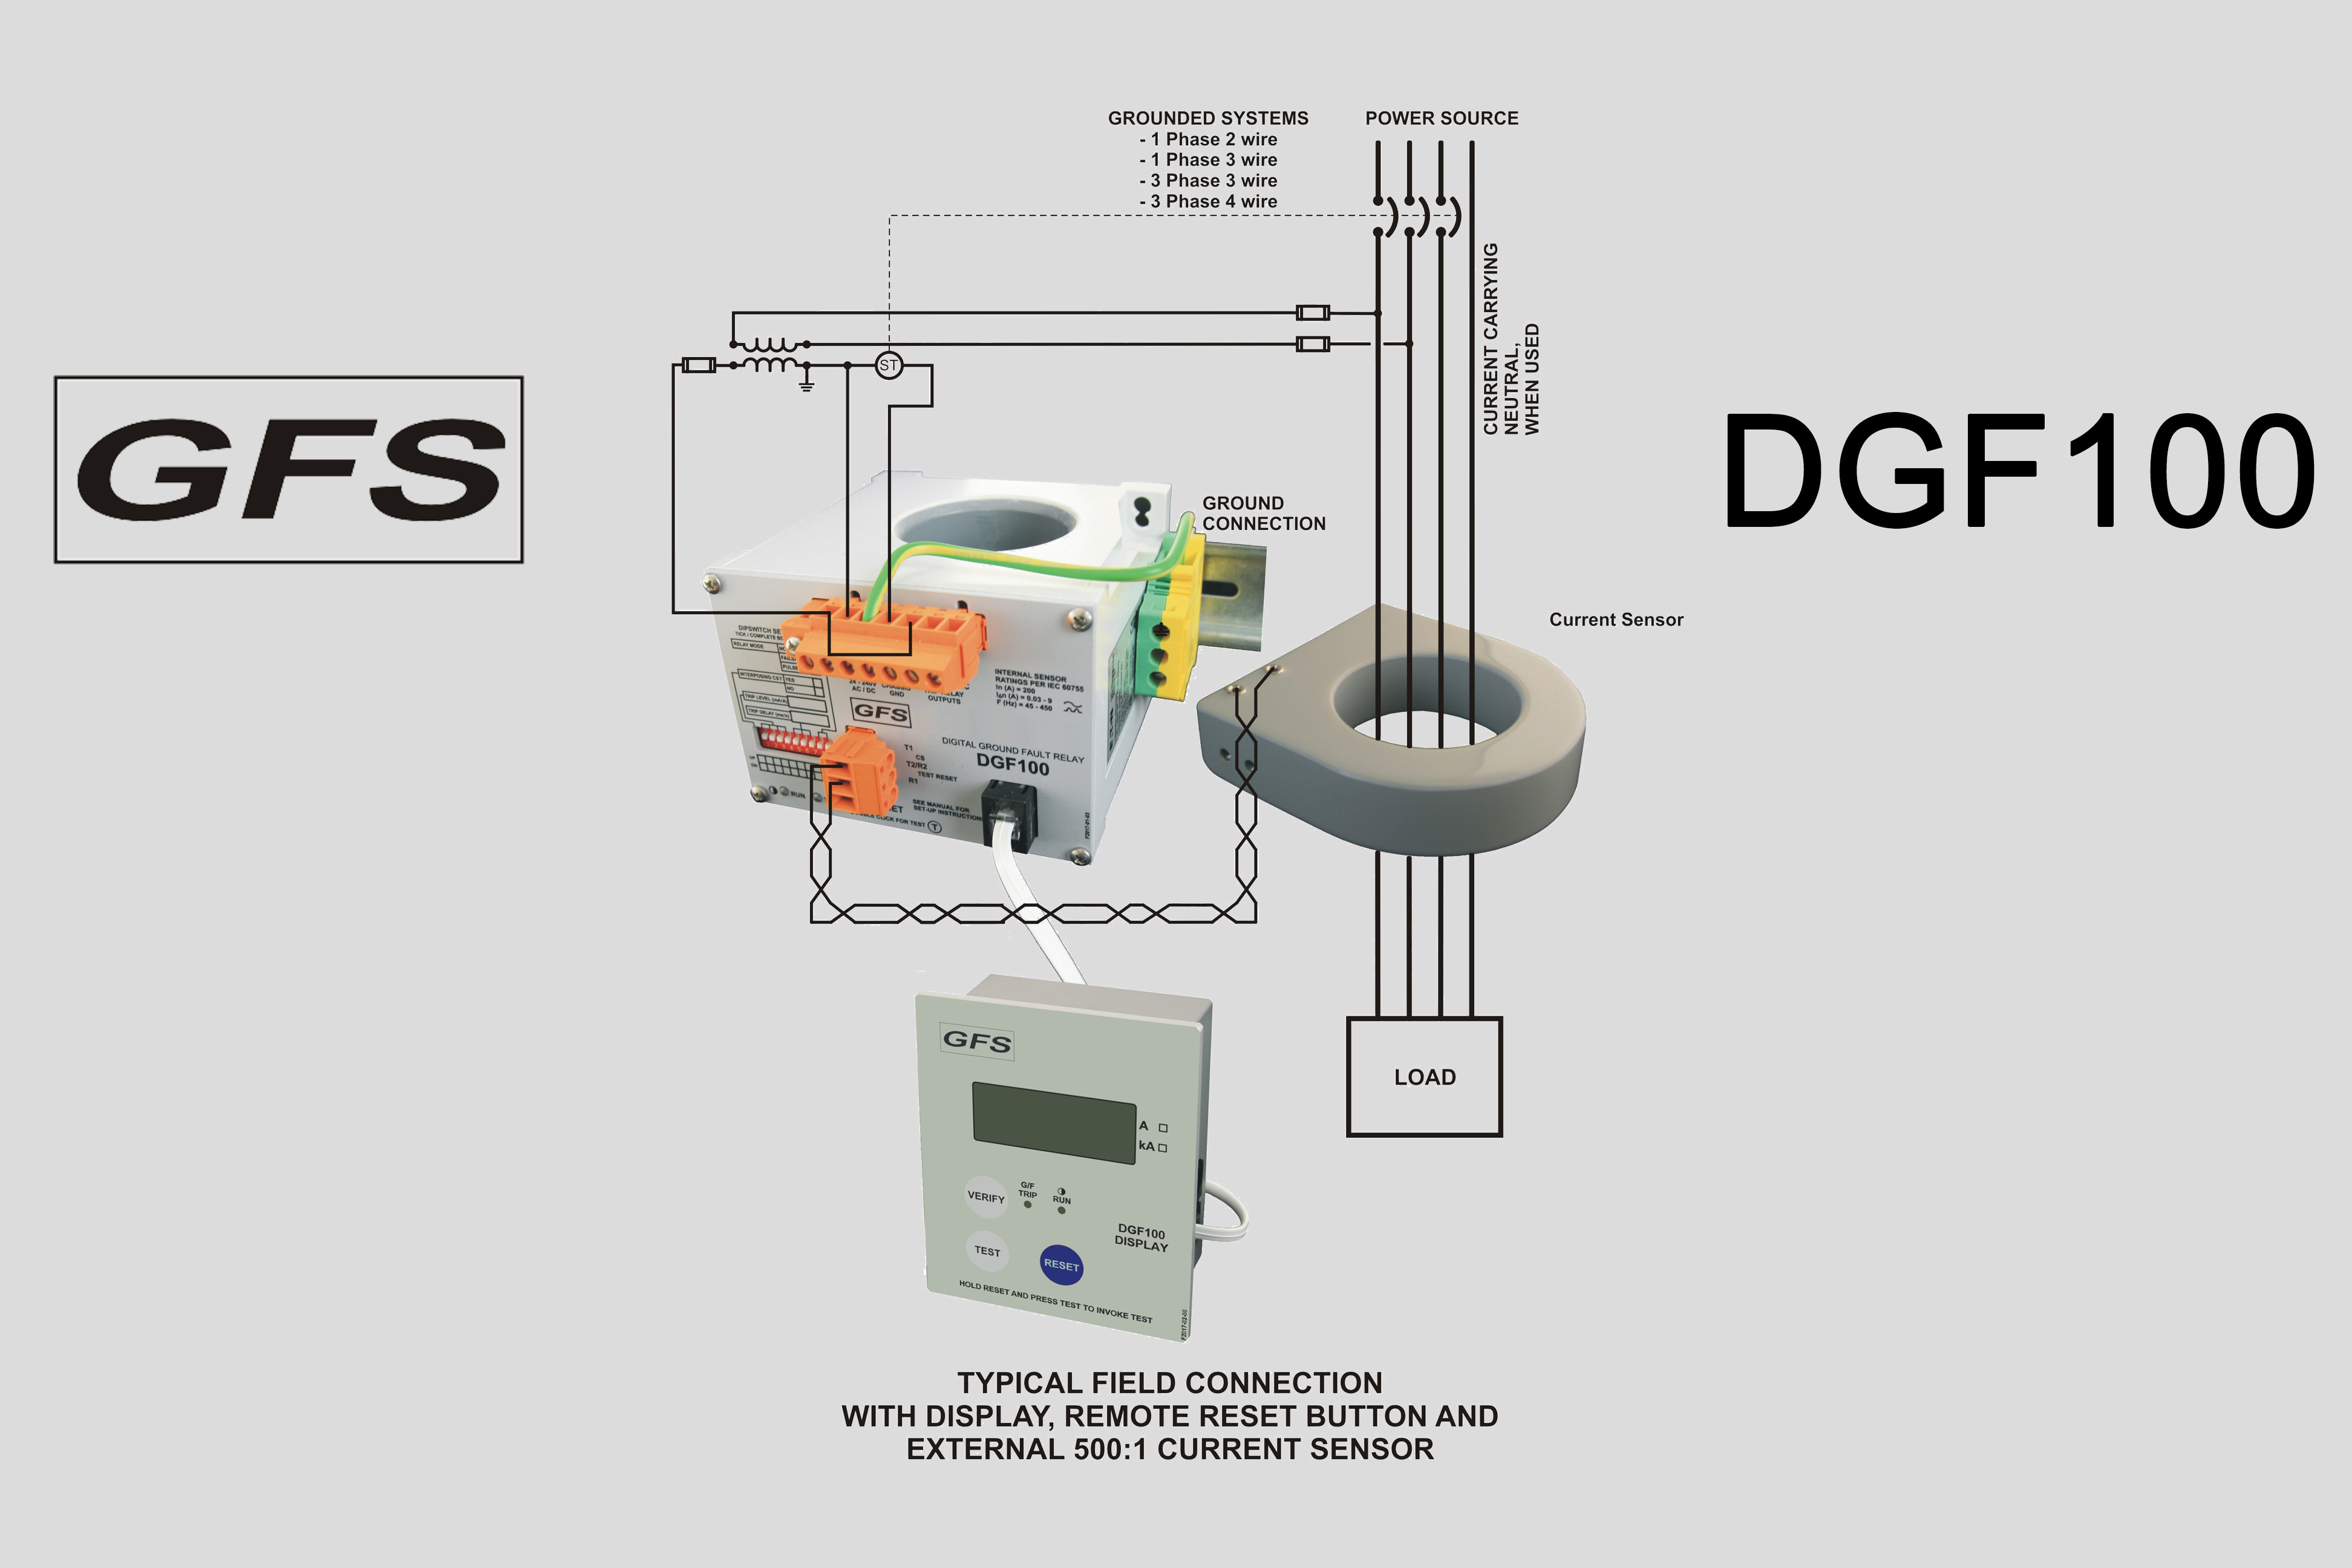 Ground Fault Relay DGF100 typical field connection using external sensor